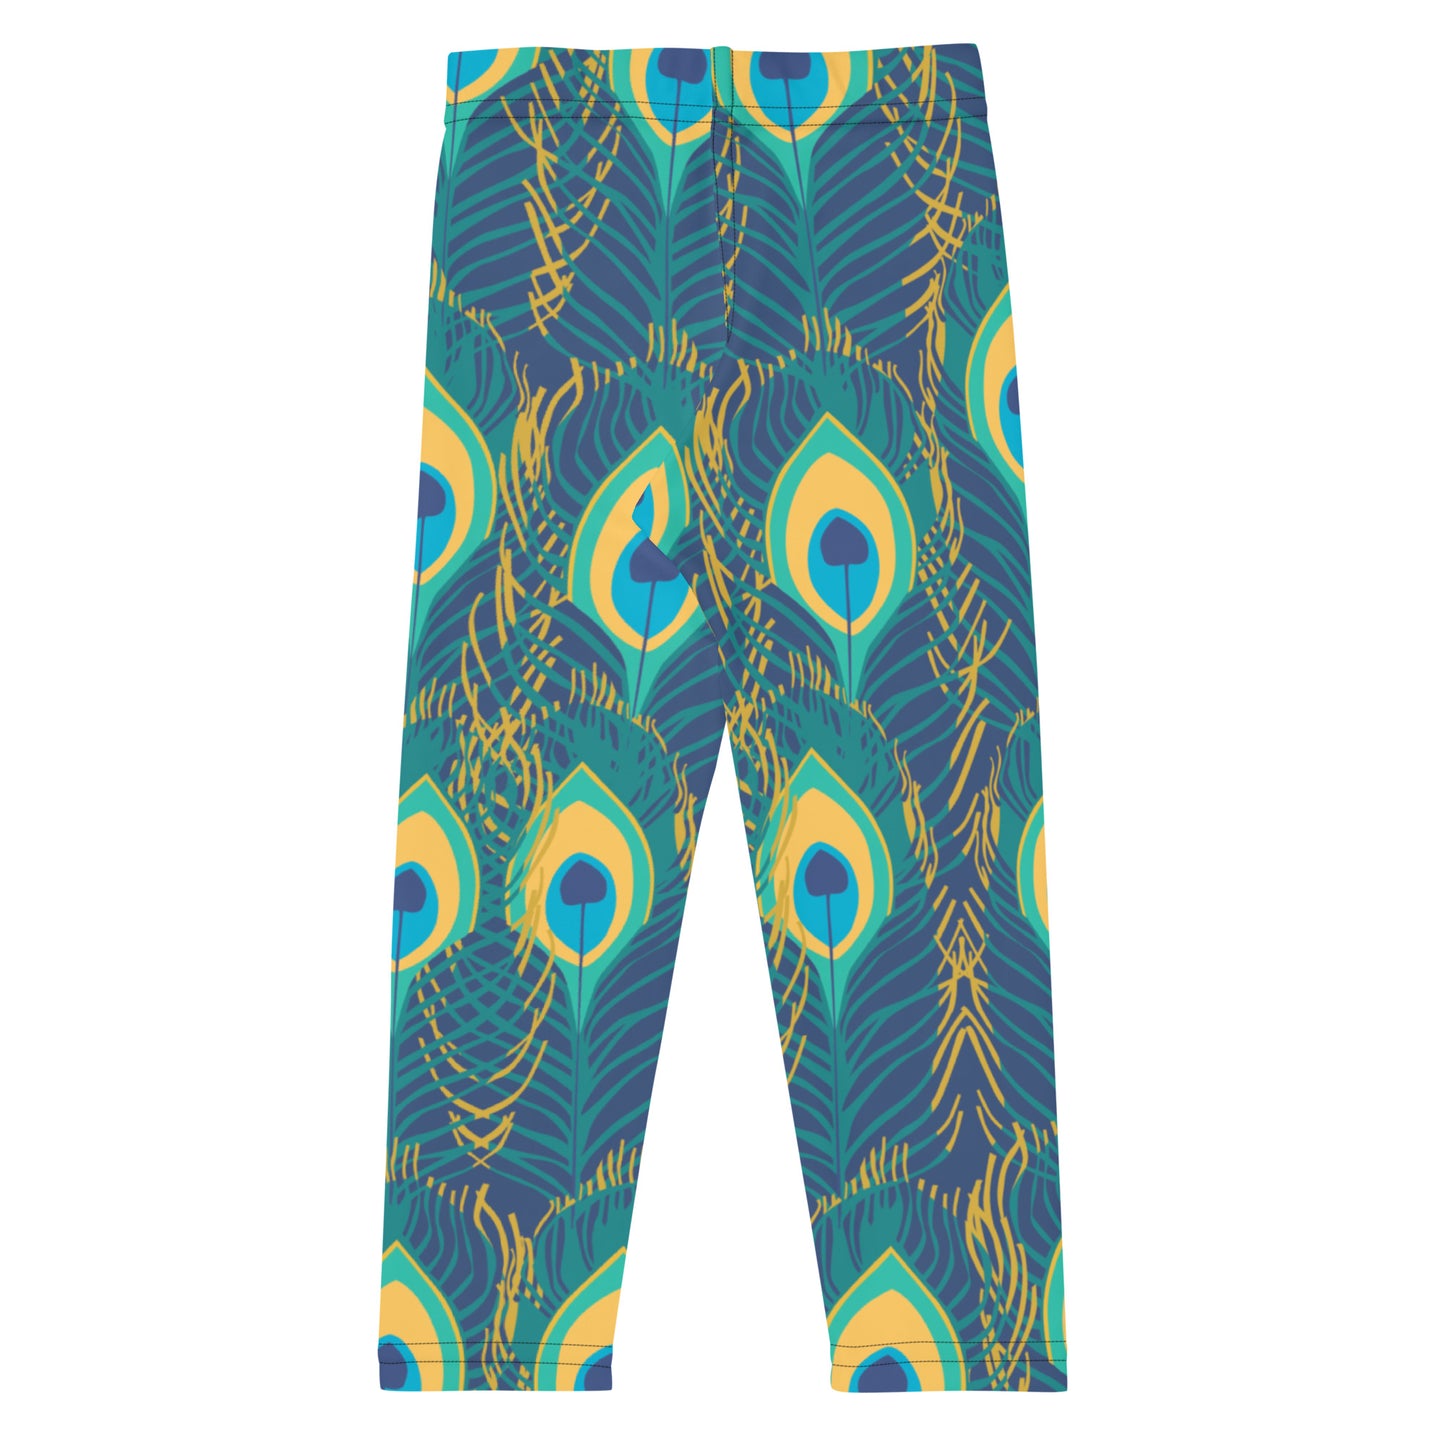 Green Peacock feathers Kid's Leggings - Sport Finesse